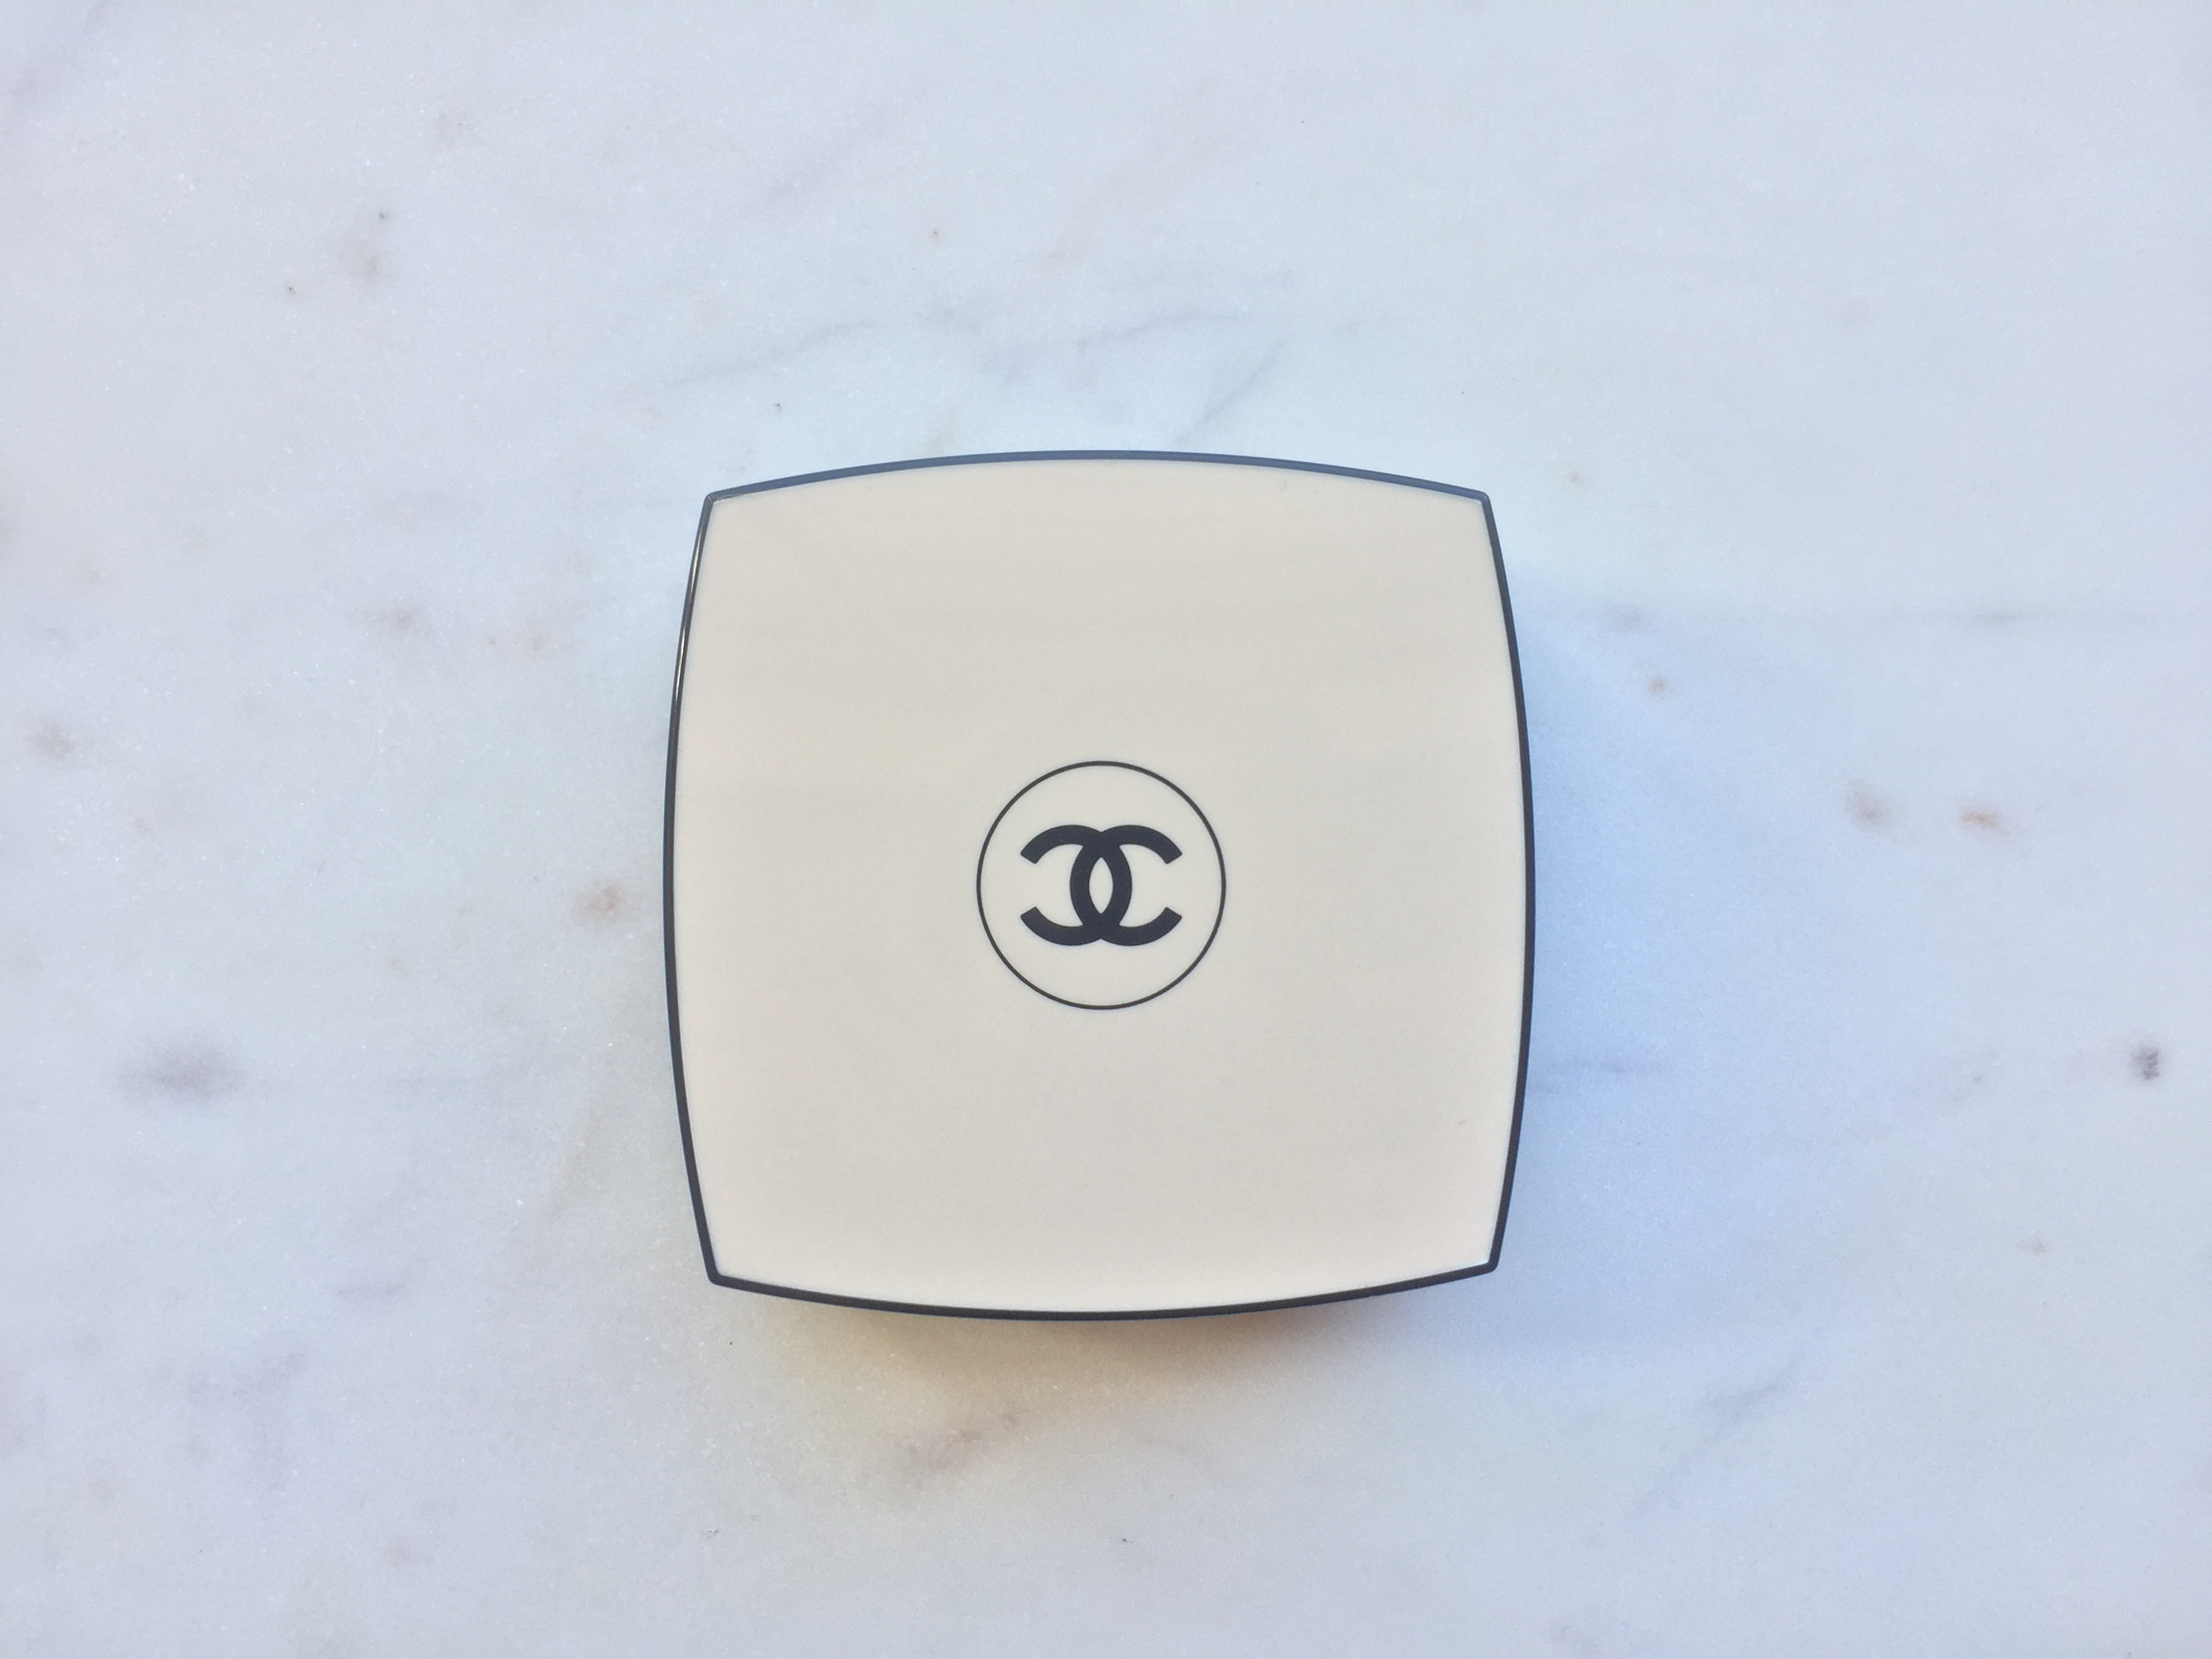 Chanel Les Beiges Healthy Glow Gel Touch Foundation review